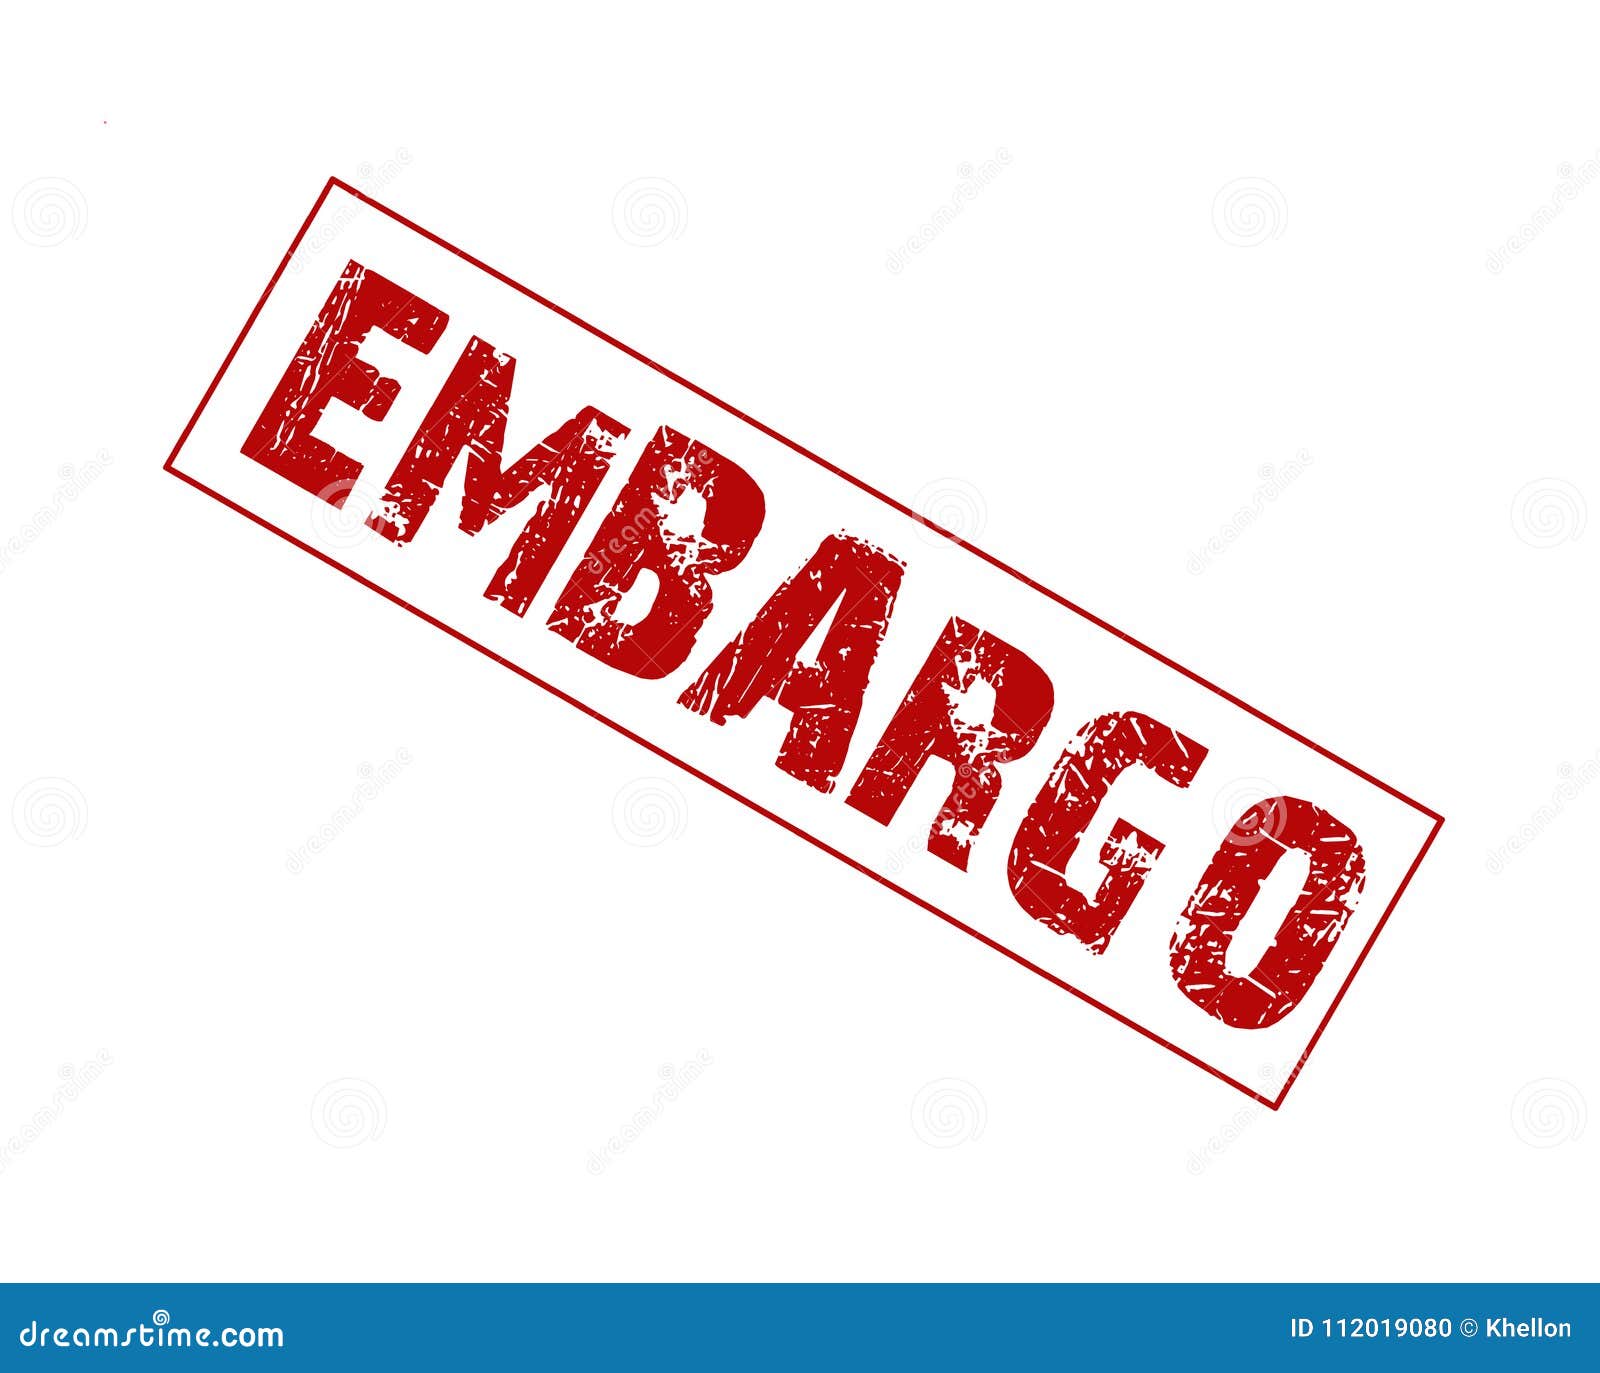 Embargo meaning in malay